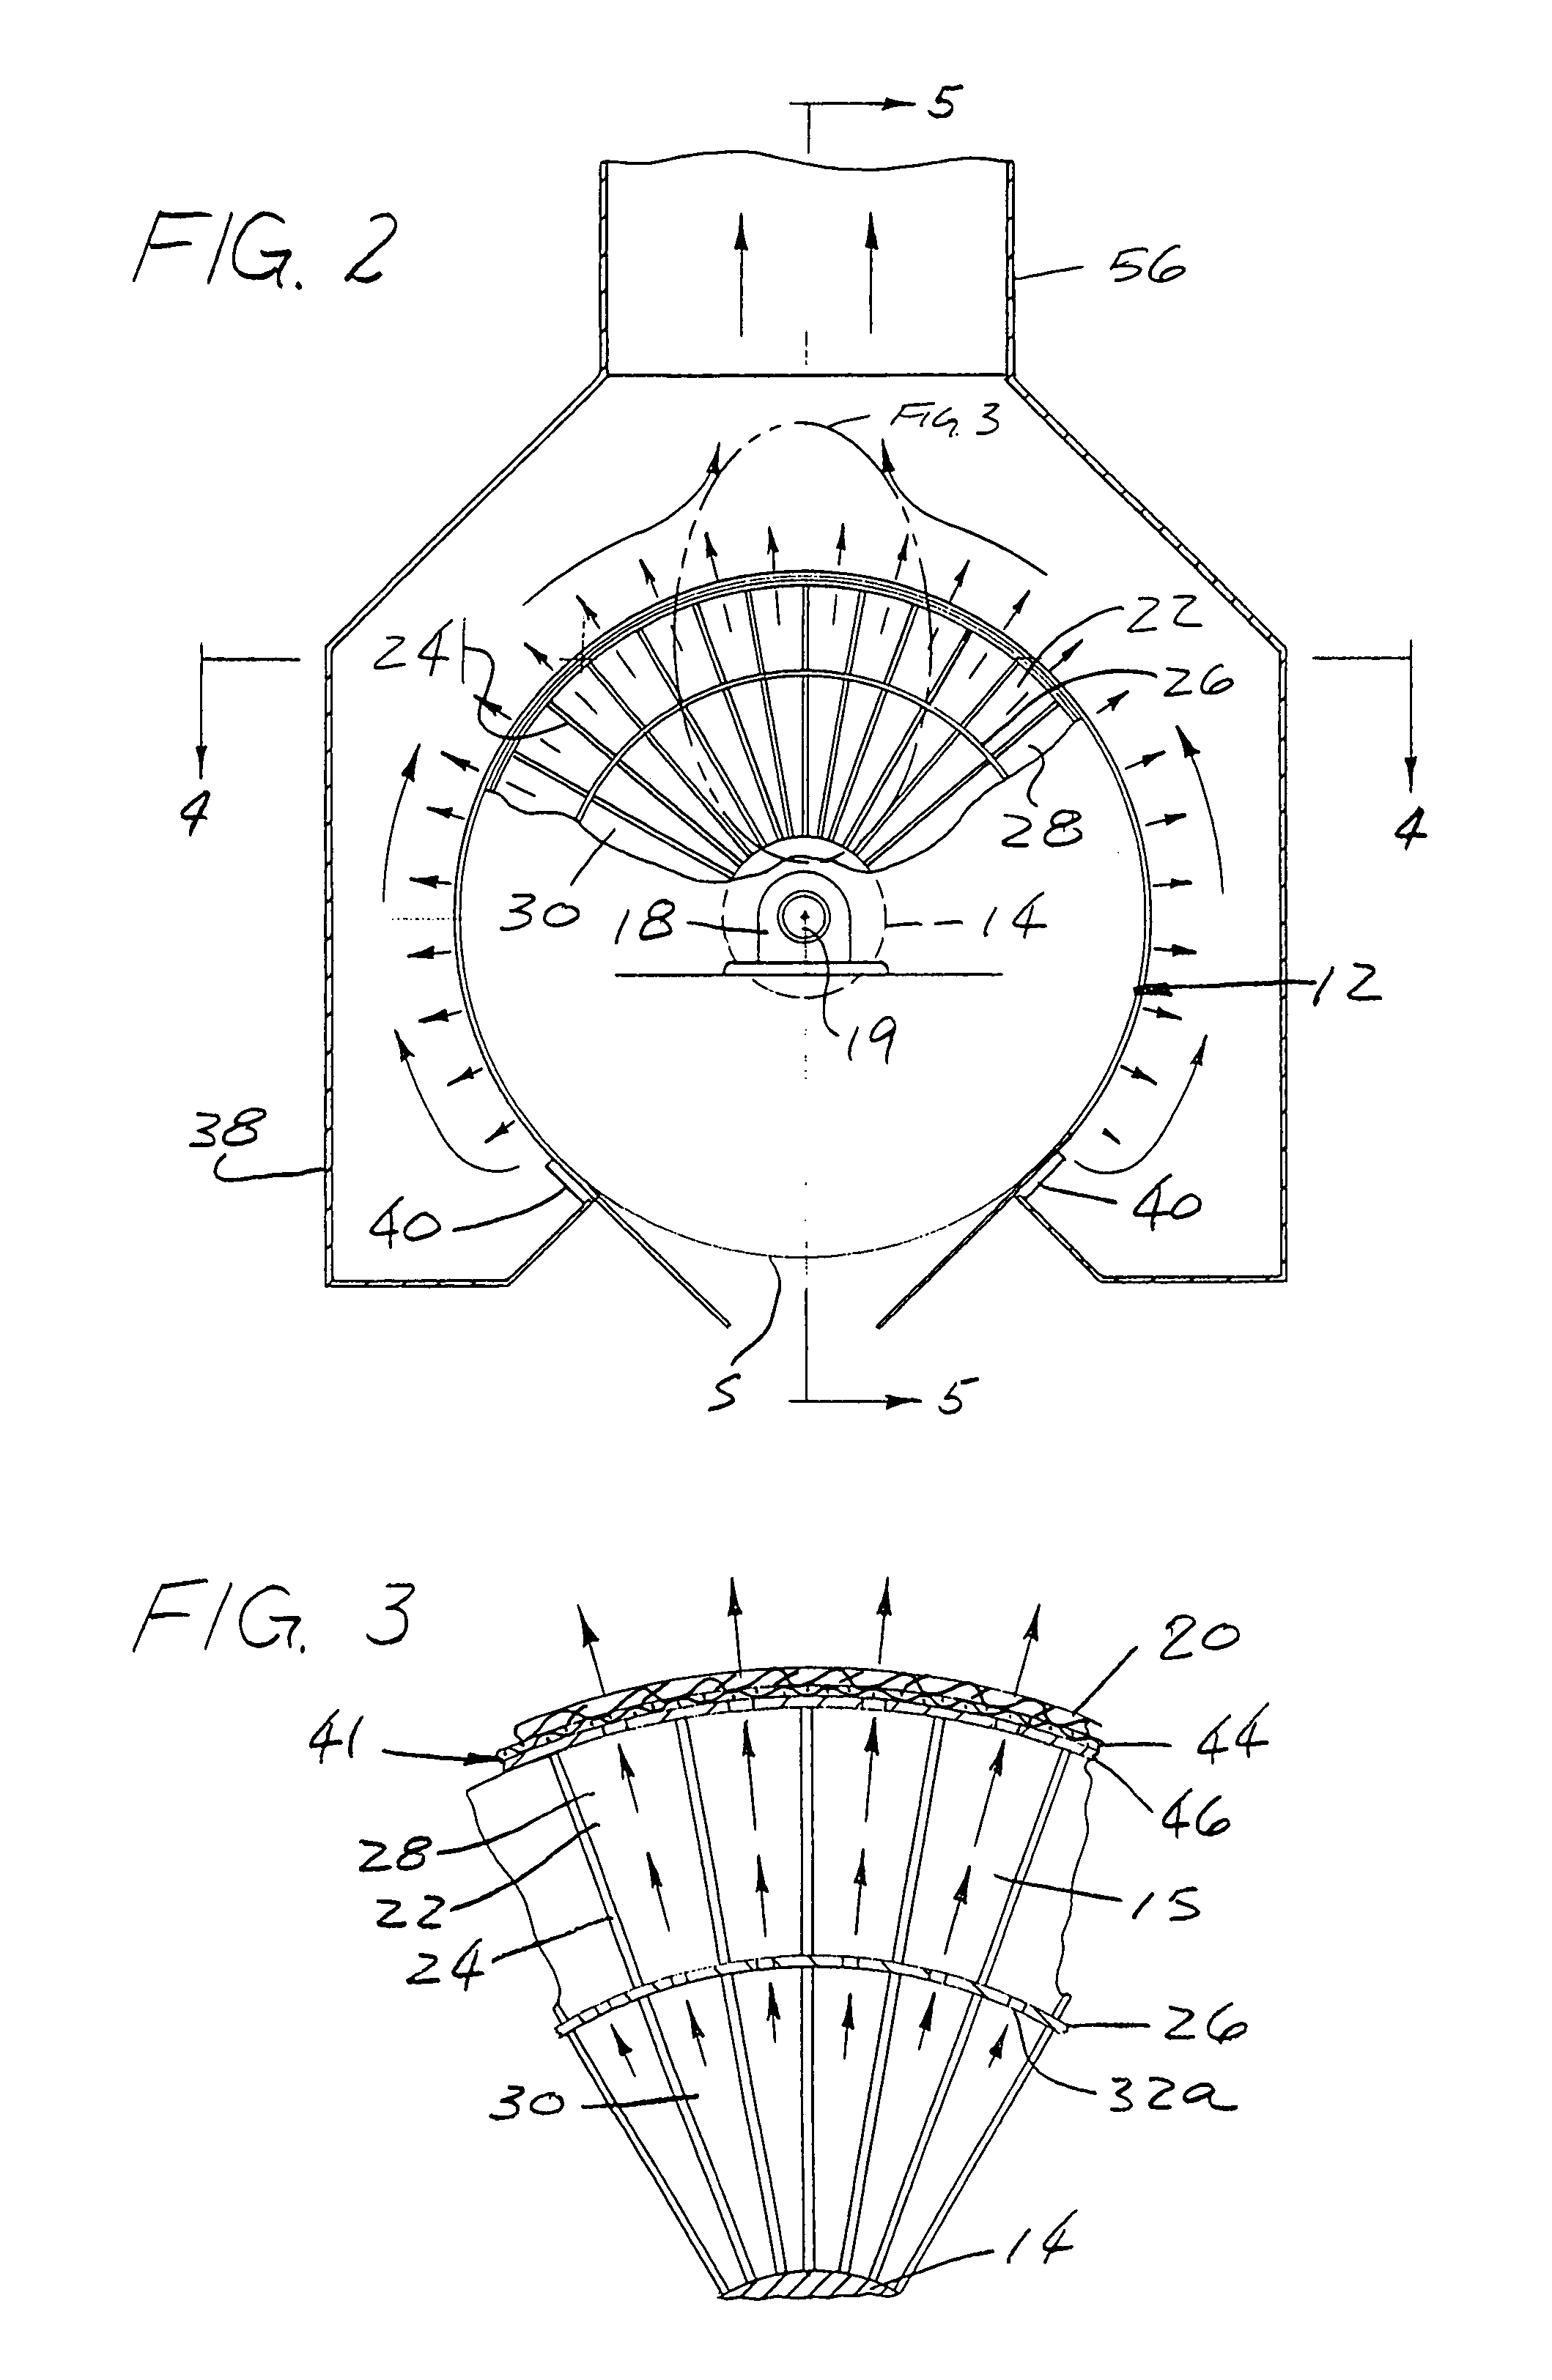 Apparatus for processing permeable or semi-permeable webs